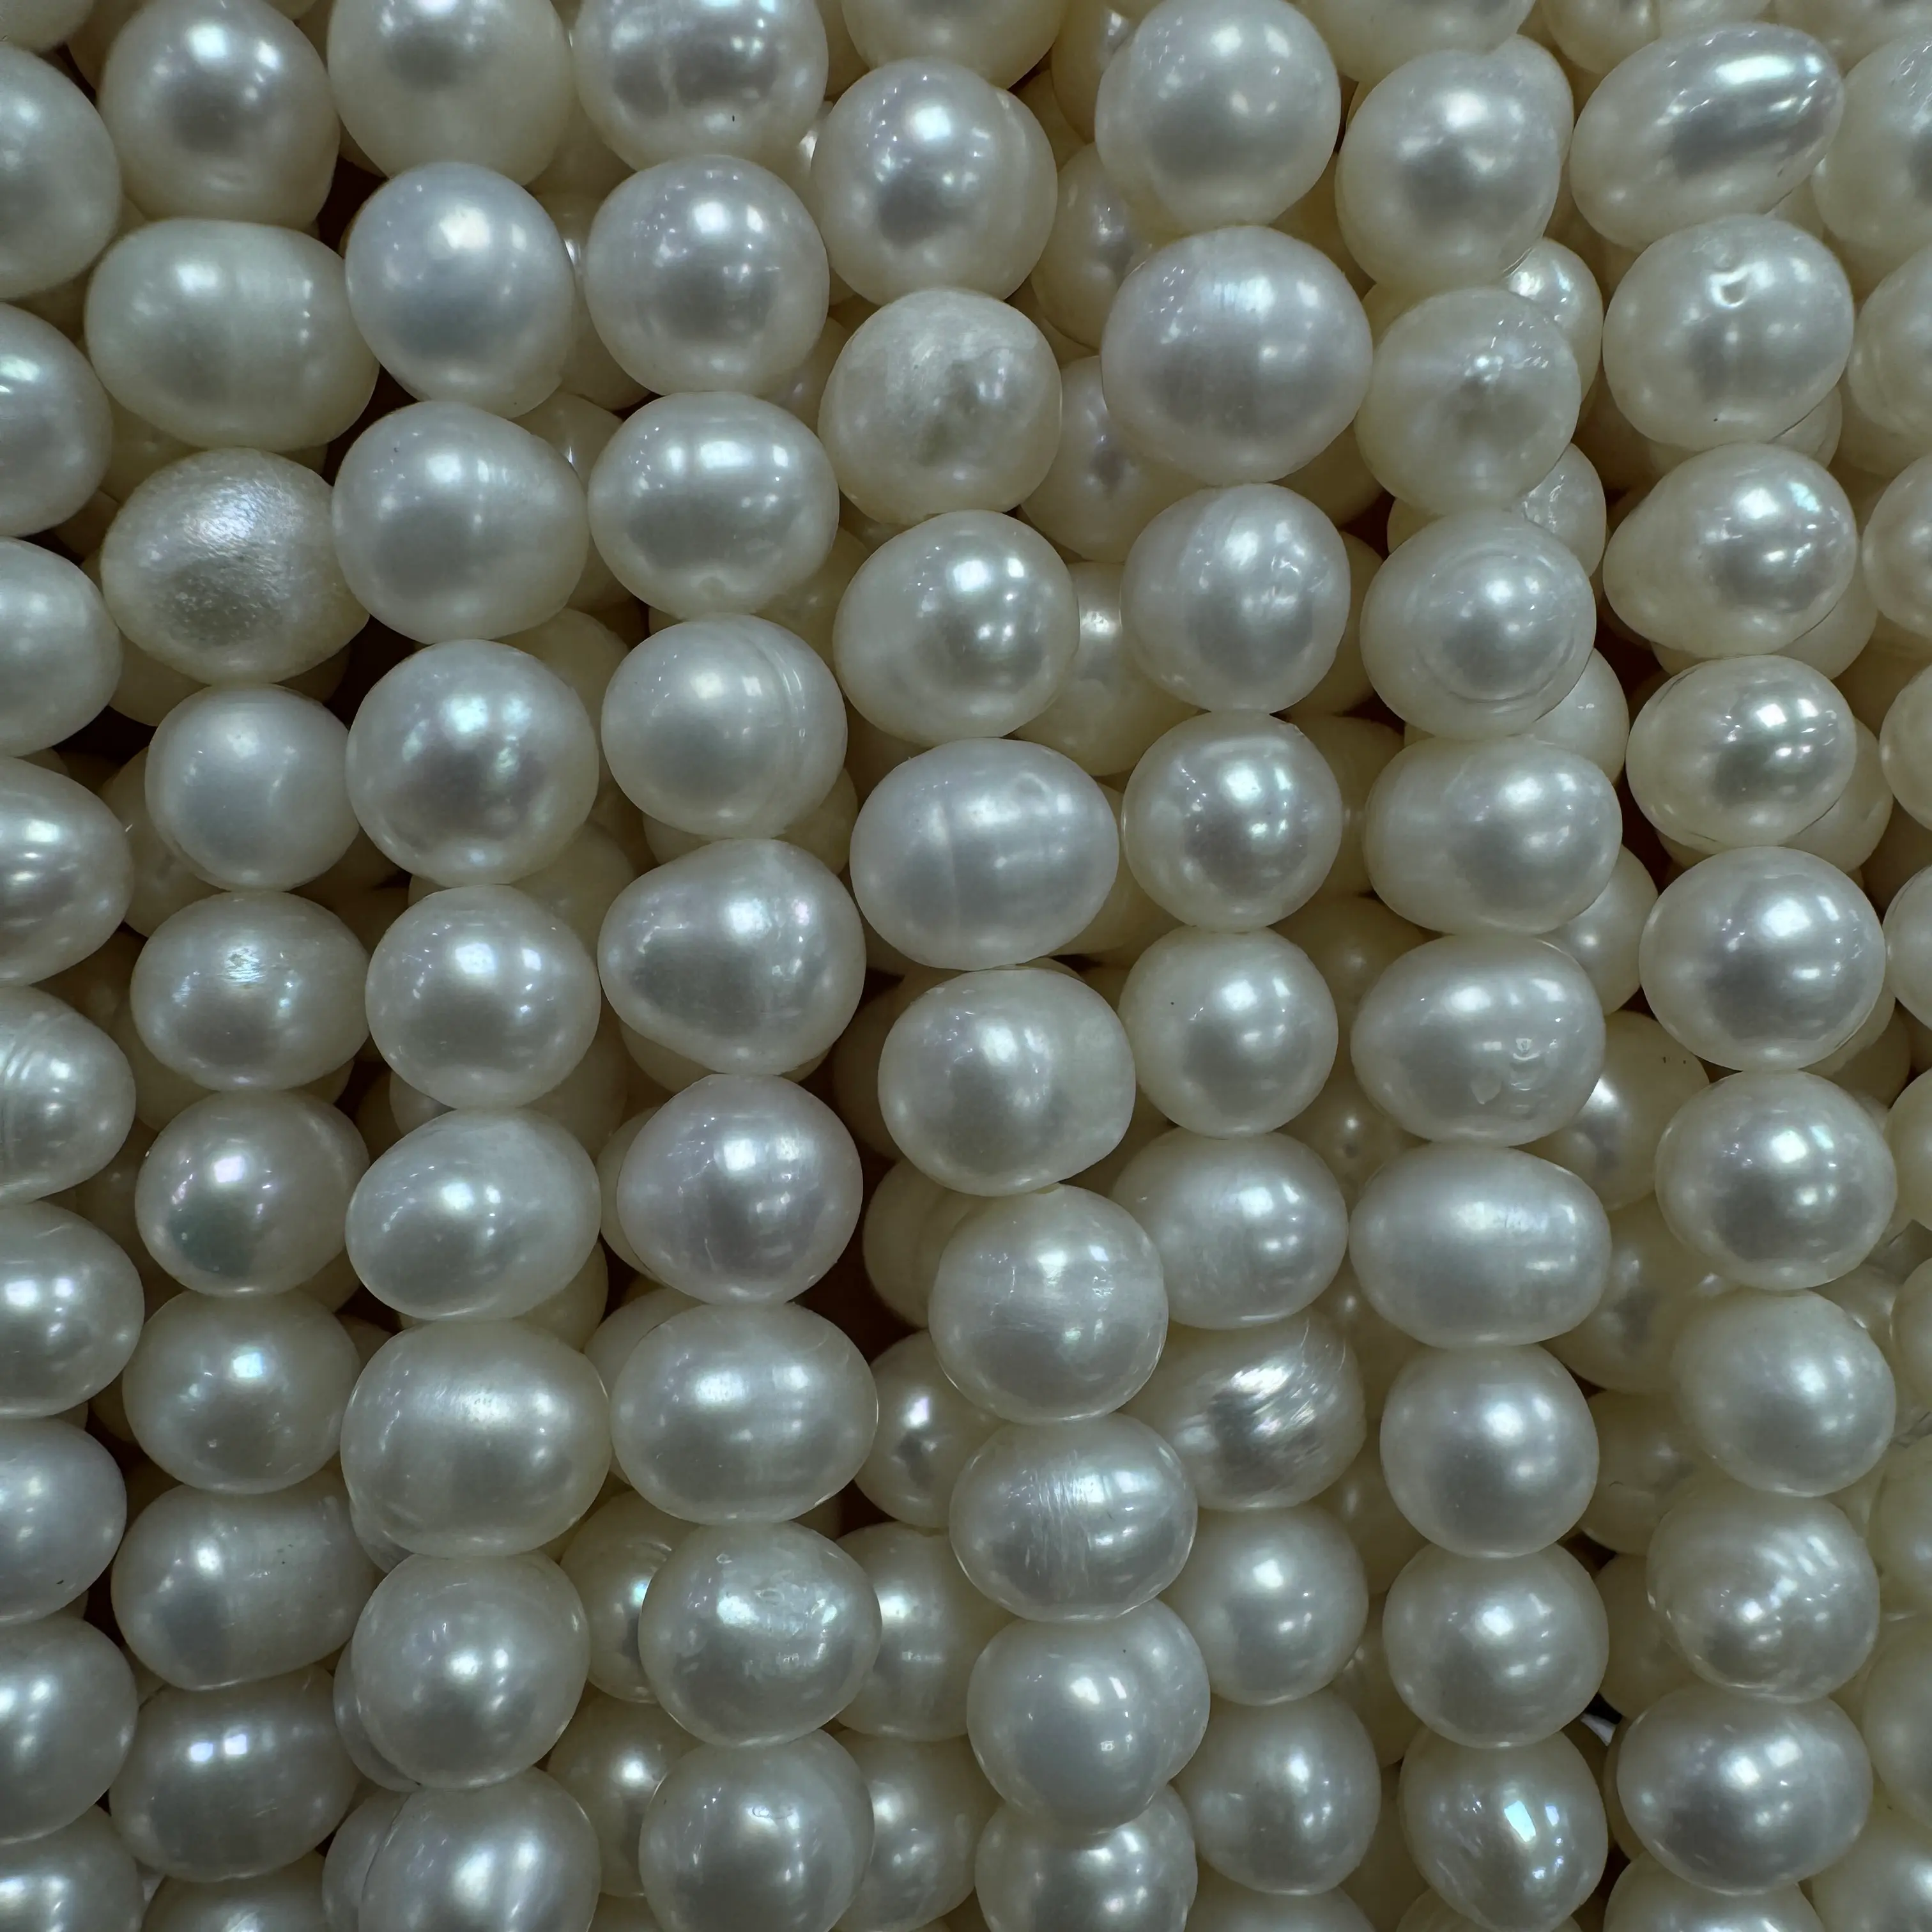 Wholesale loose pearl strand 6-7mm Potato shape threaded pearl natural freshwater loose pearls beads